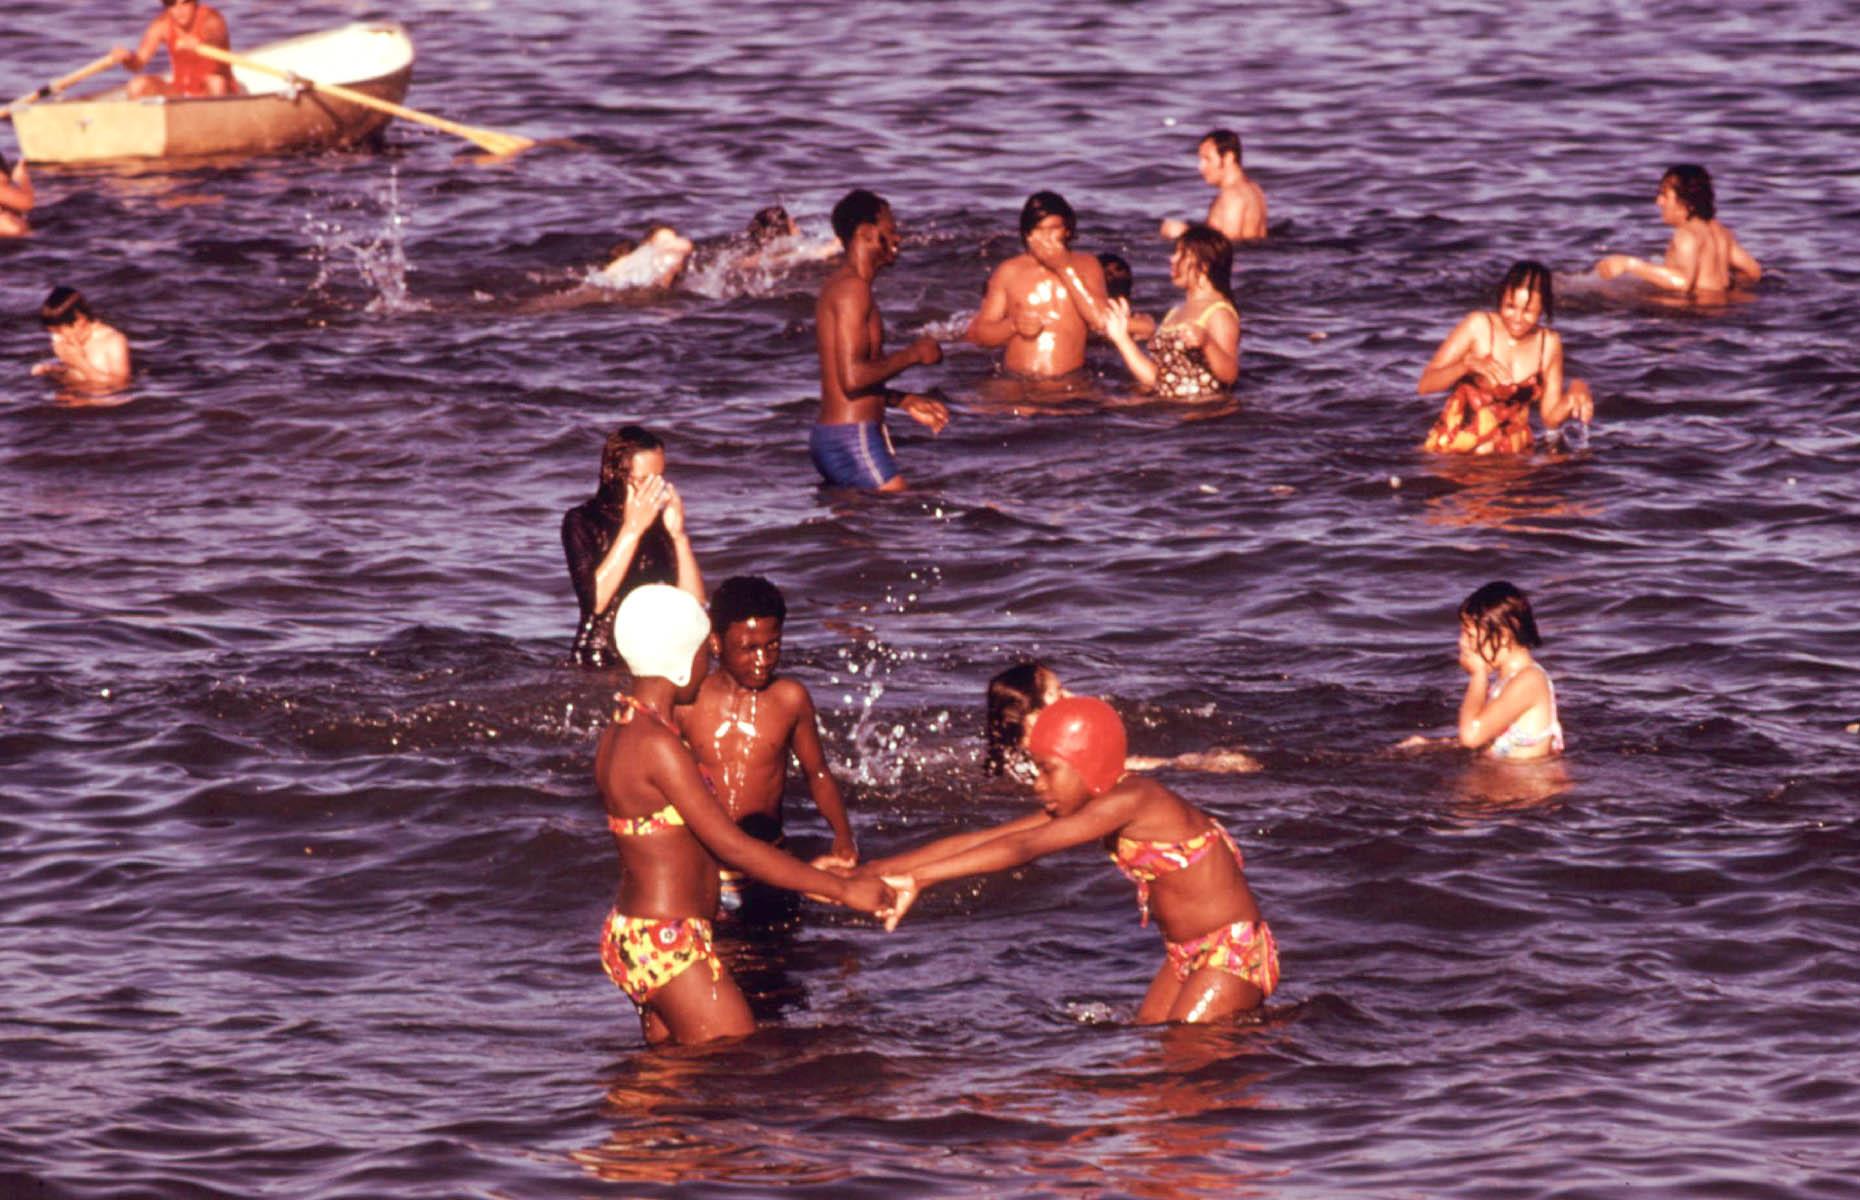 While plenty of sun-seekers made their way to the coast, others made a splash in America's Great Lakes. This 1973 shot shows youngsters swimming and paddling in Lake Michigan, off Chicago's South Side shores.